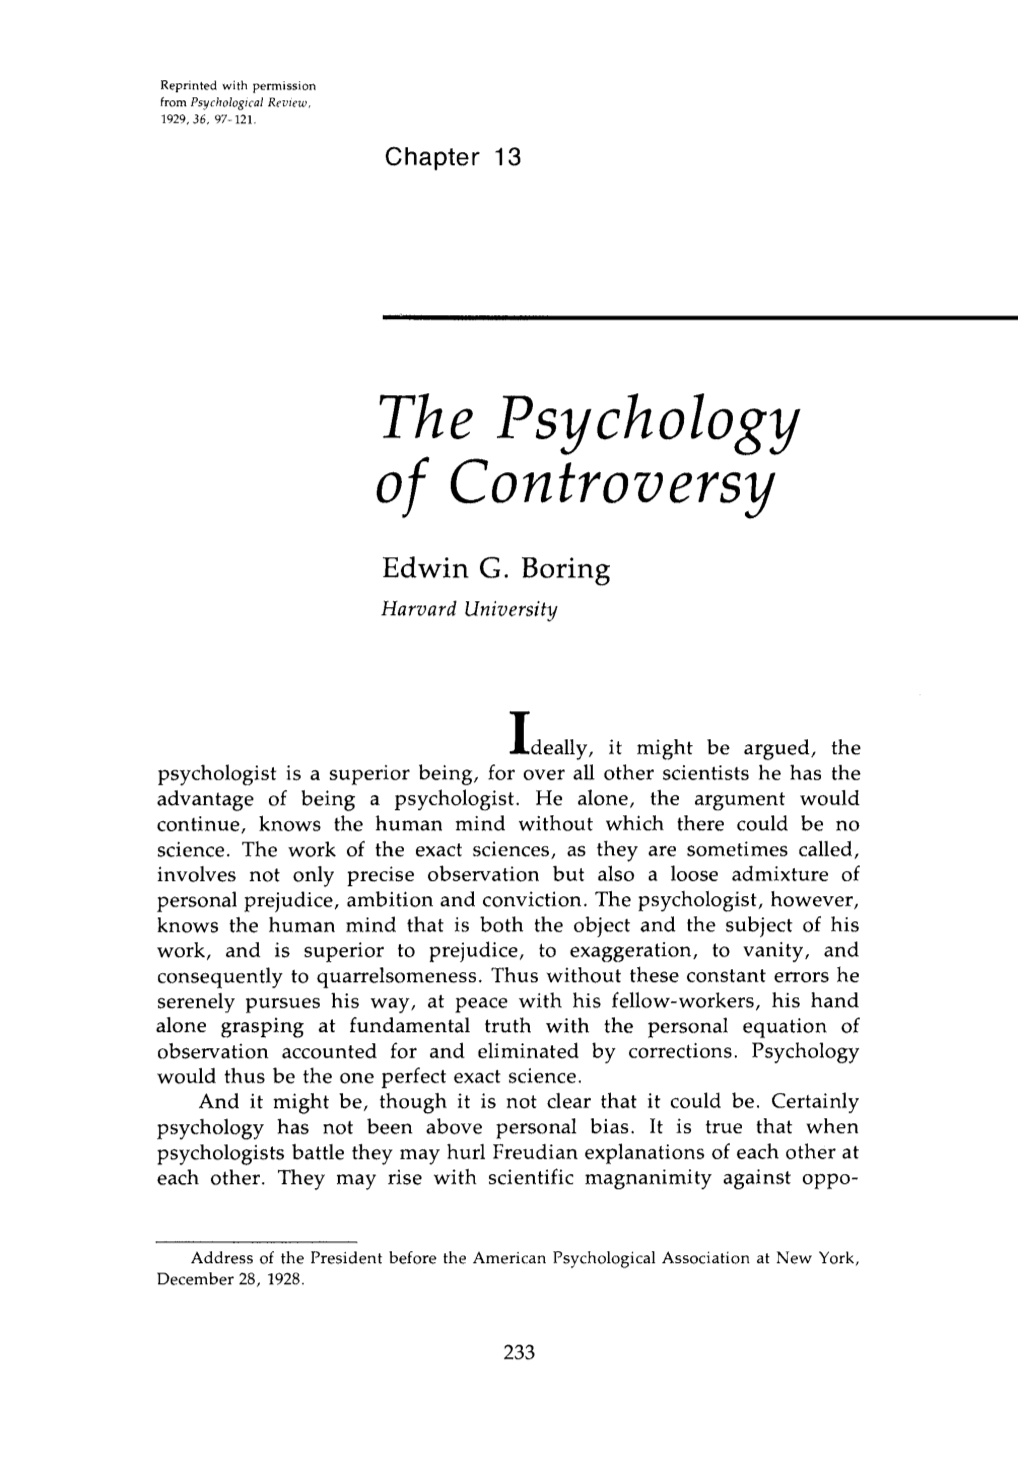 Boring (1929) the Psychology of Controversy